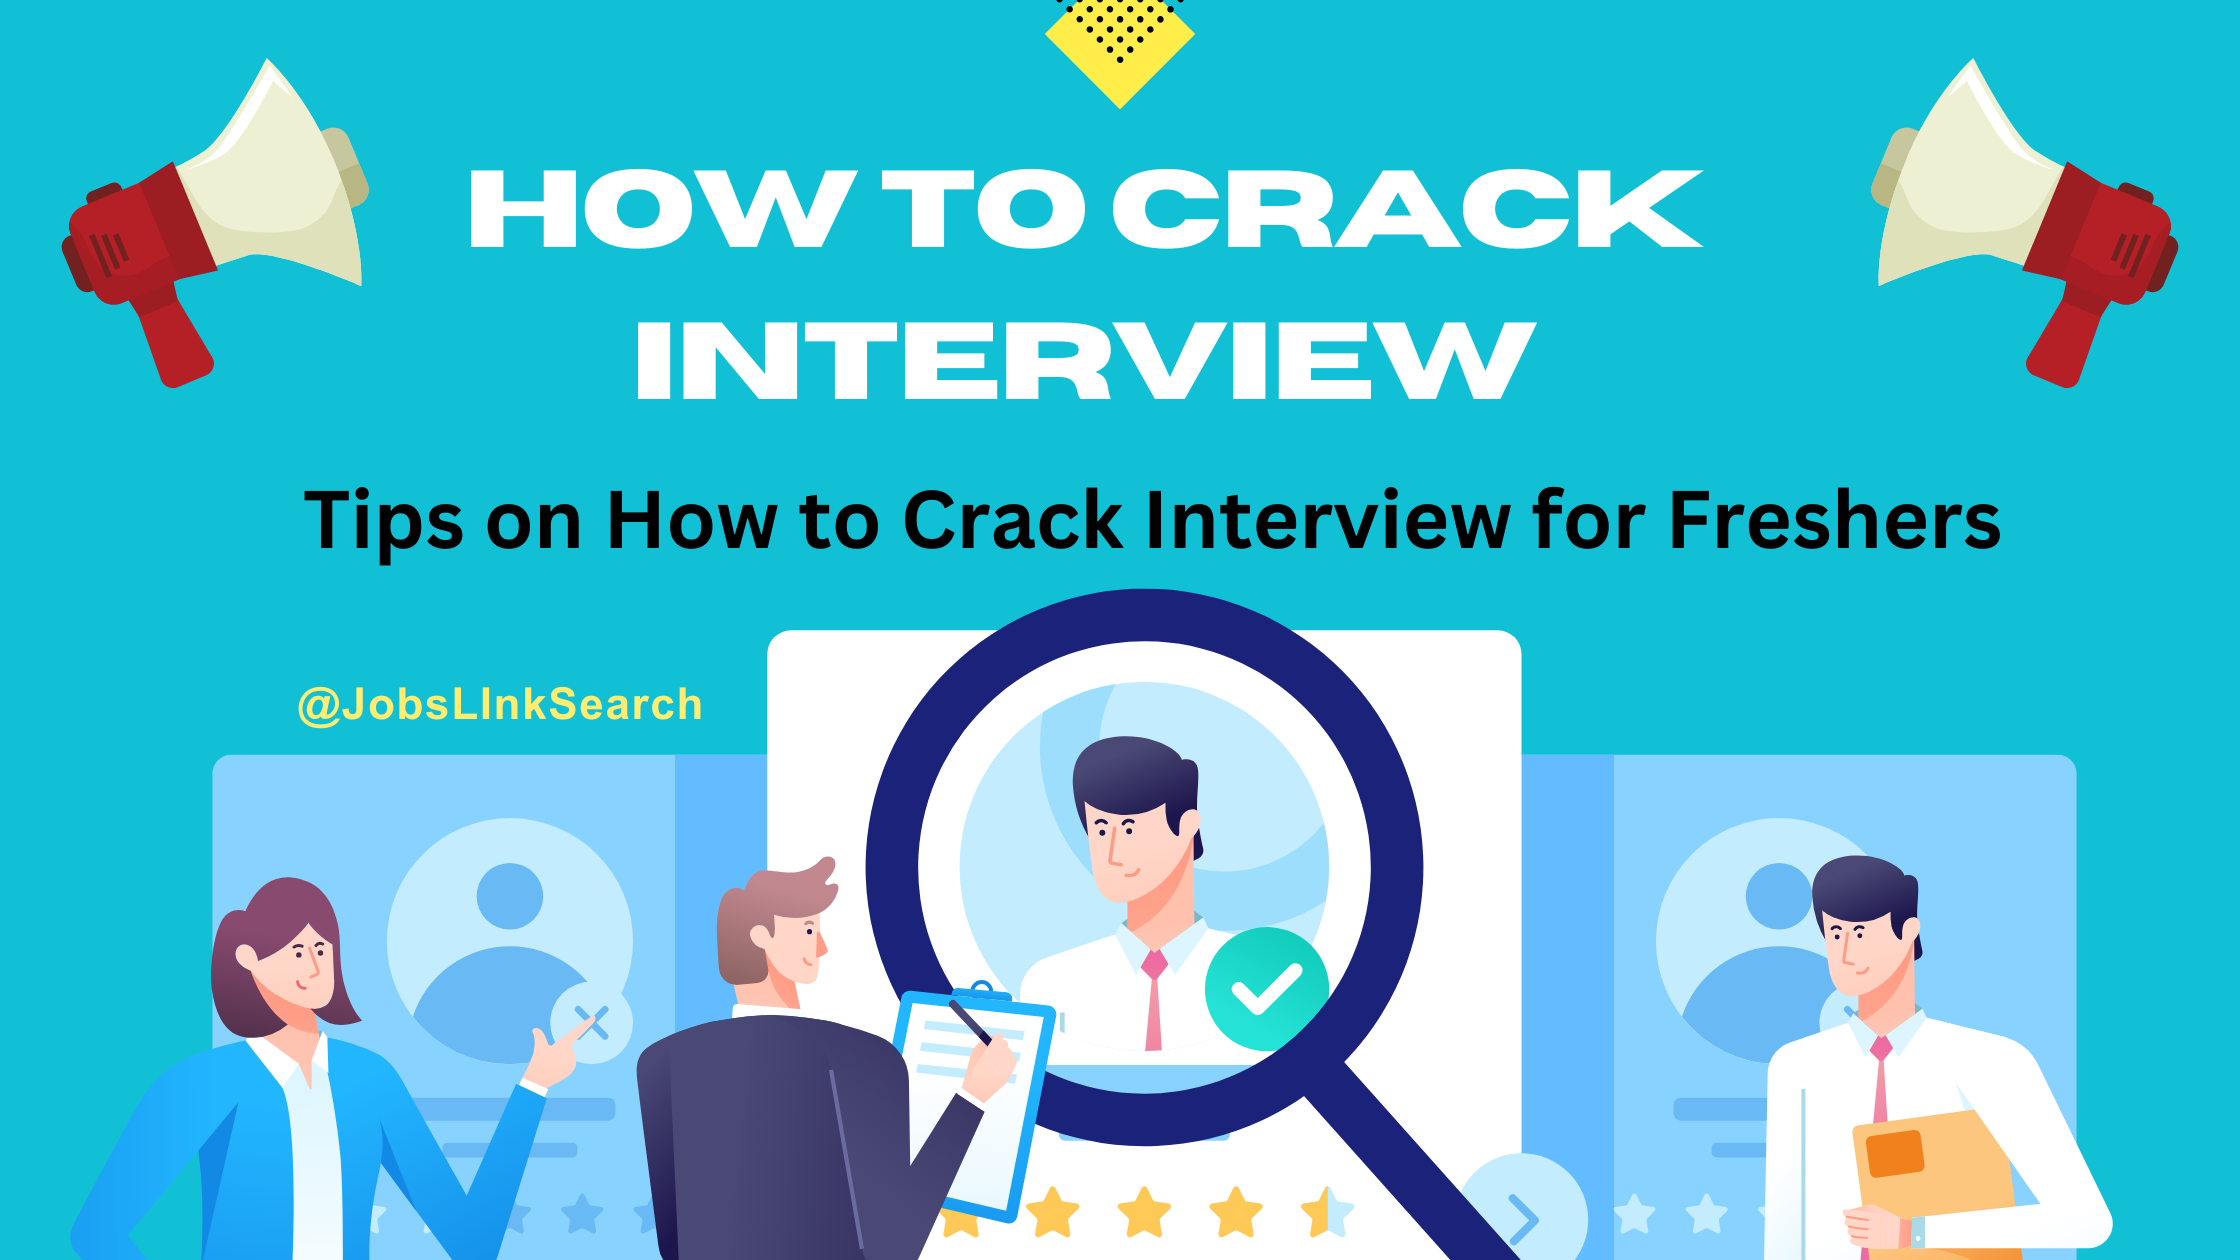 How to Crack Interview